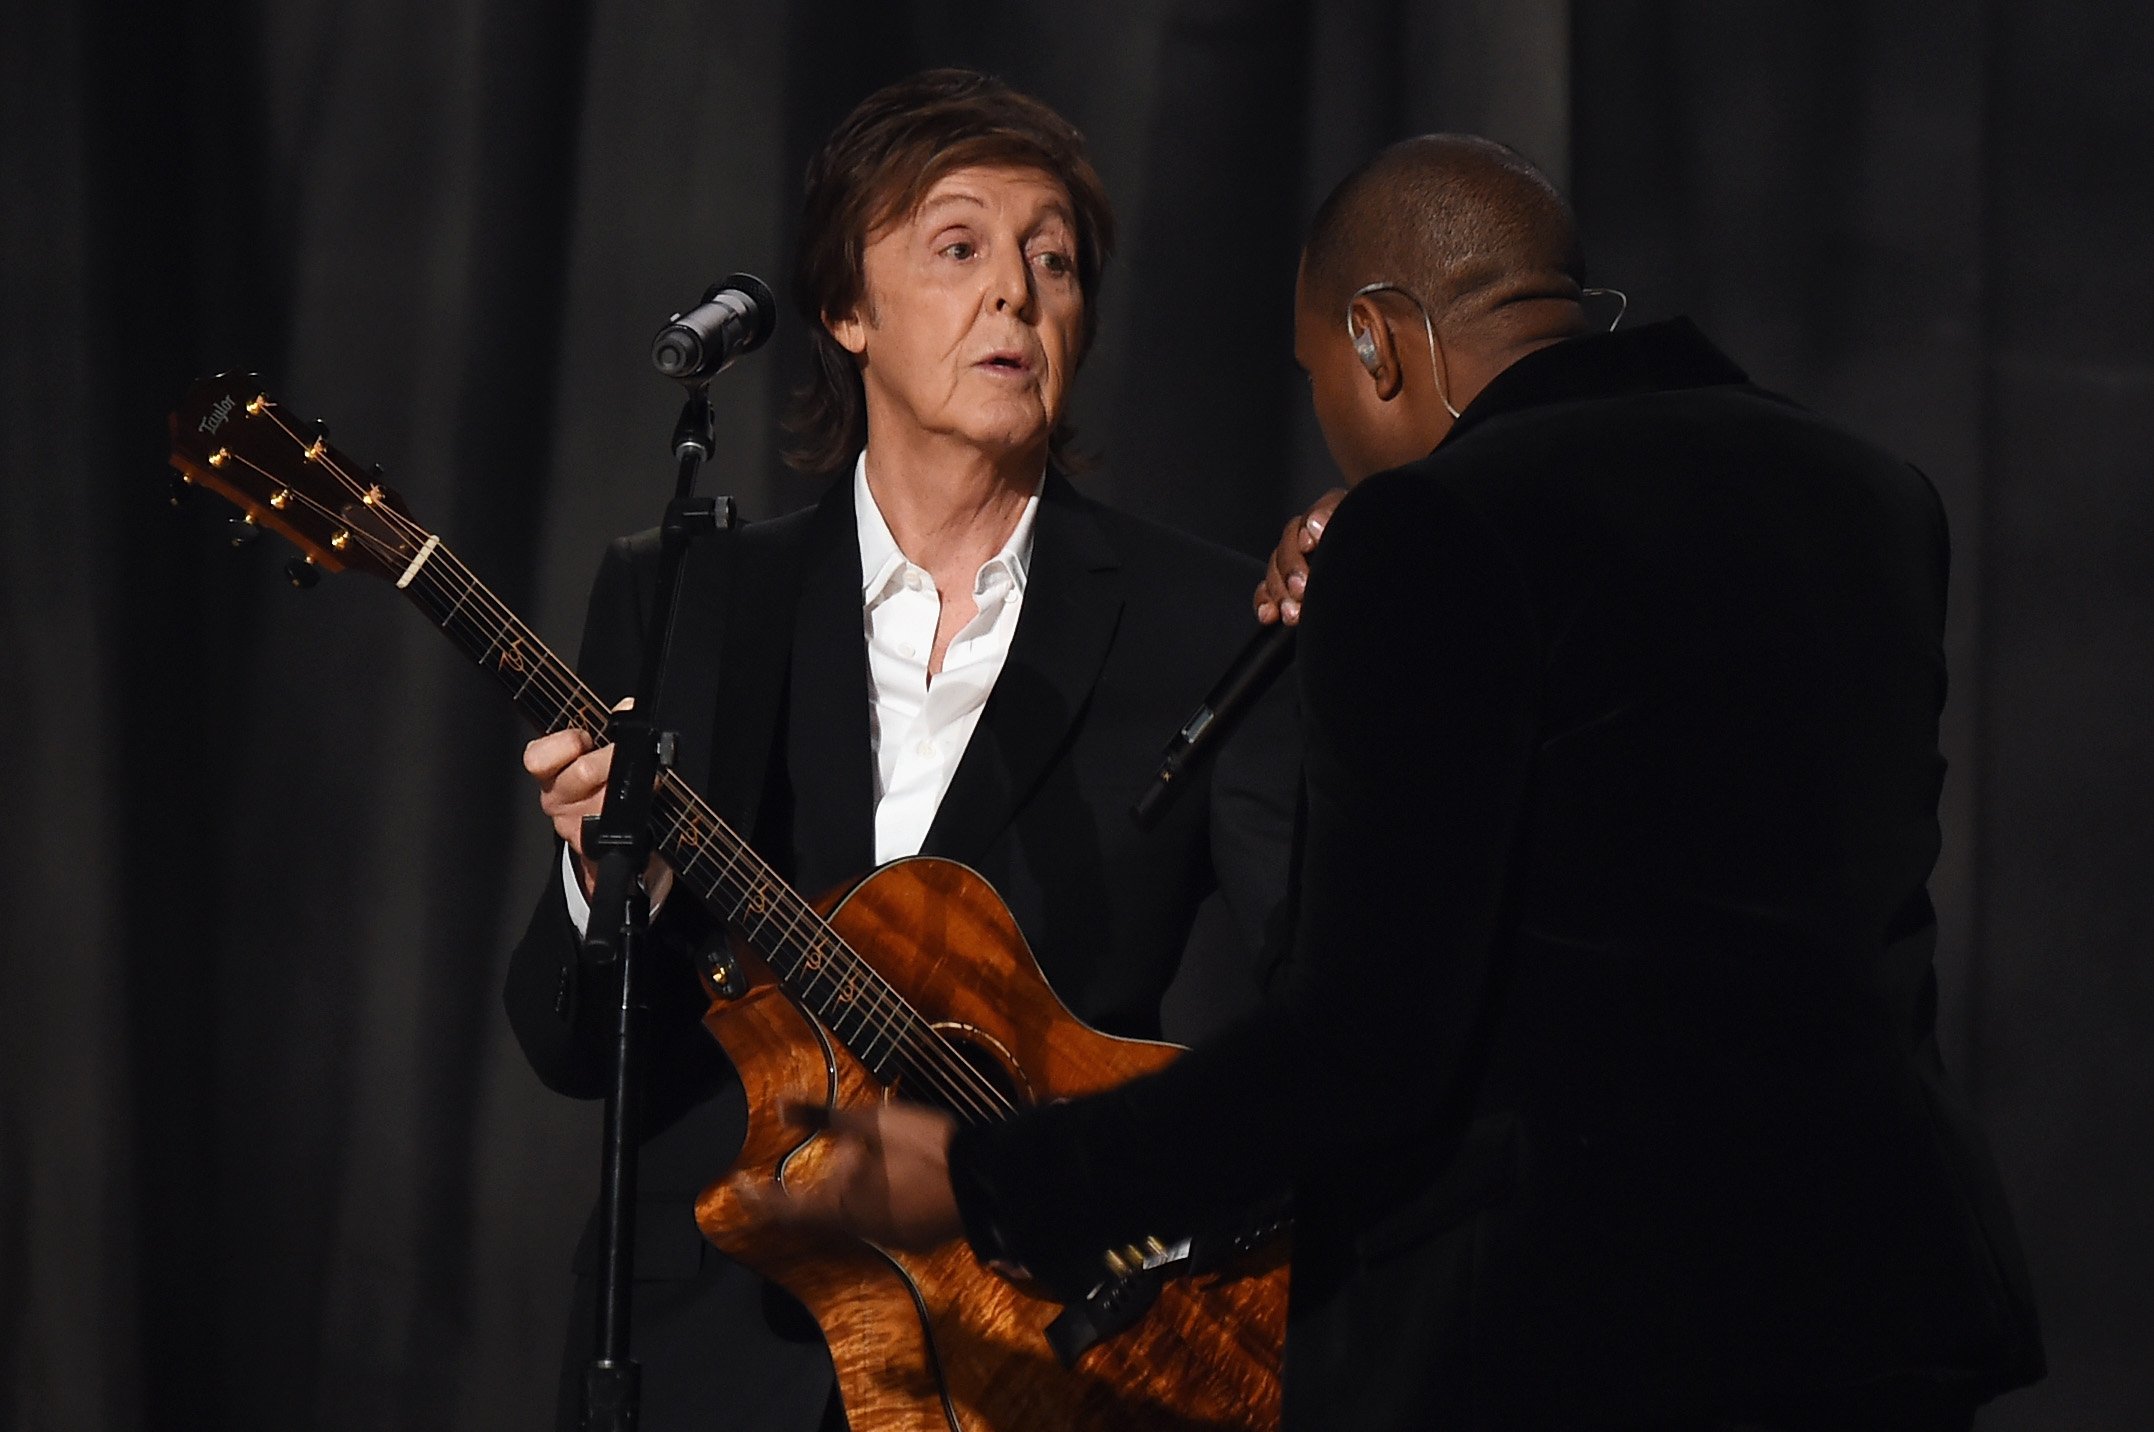 Paul McCartney and Kanye West perform onstage at the 57th Annual Grammy Awards